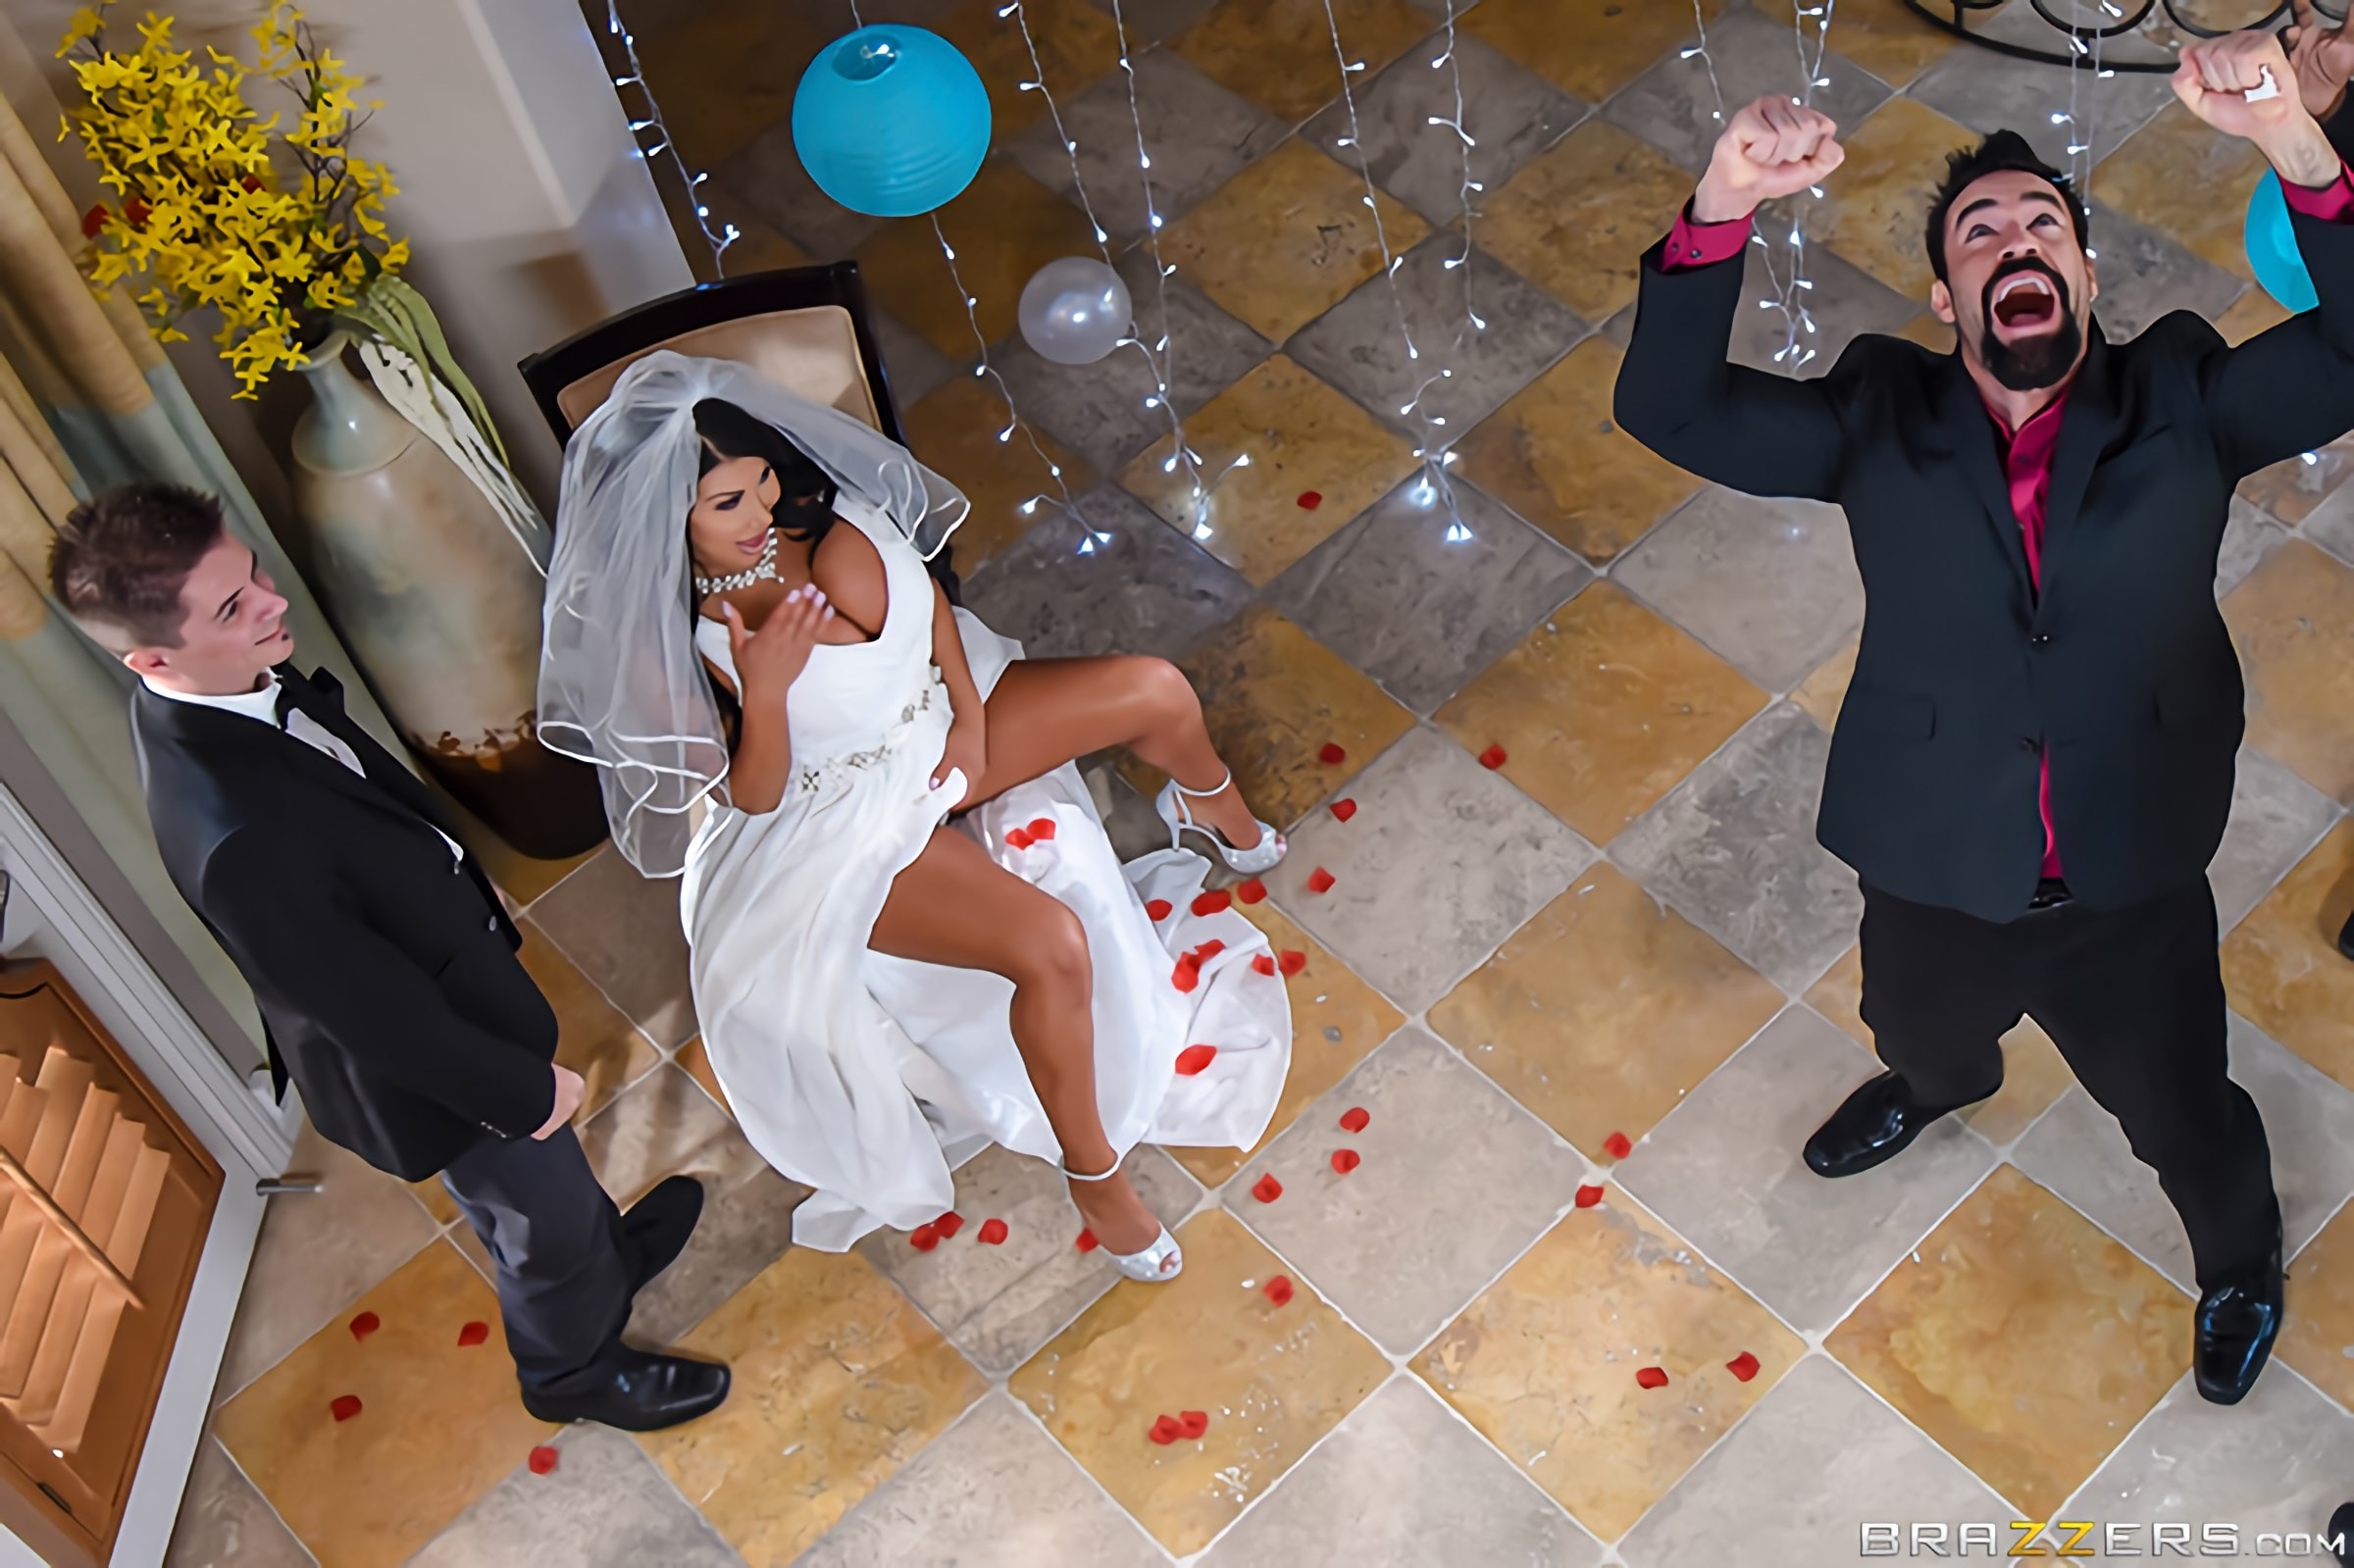 Brazzers 'Catch The Garter Belt, Fuck The Bride' starring August Taylor (Photo 1)